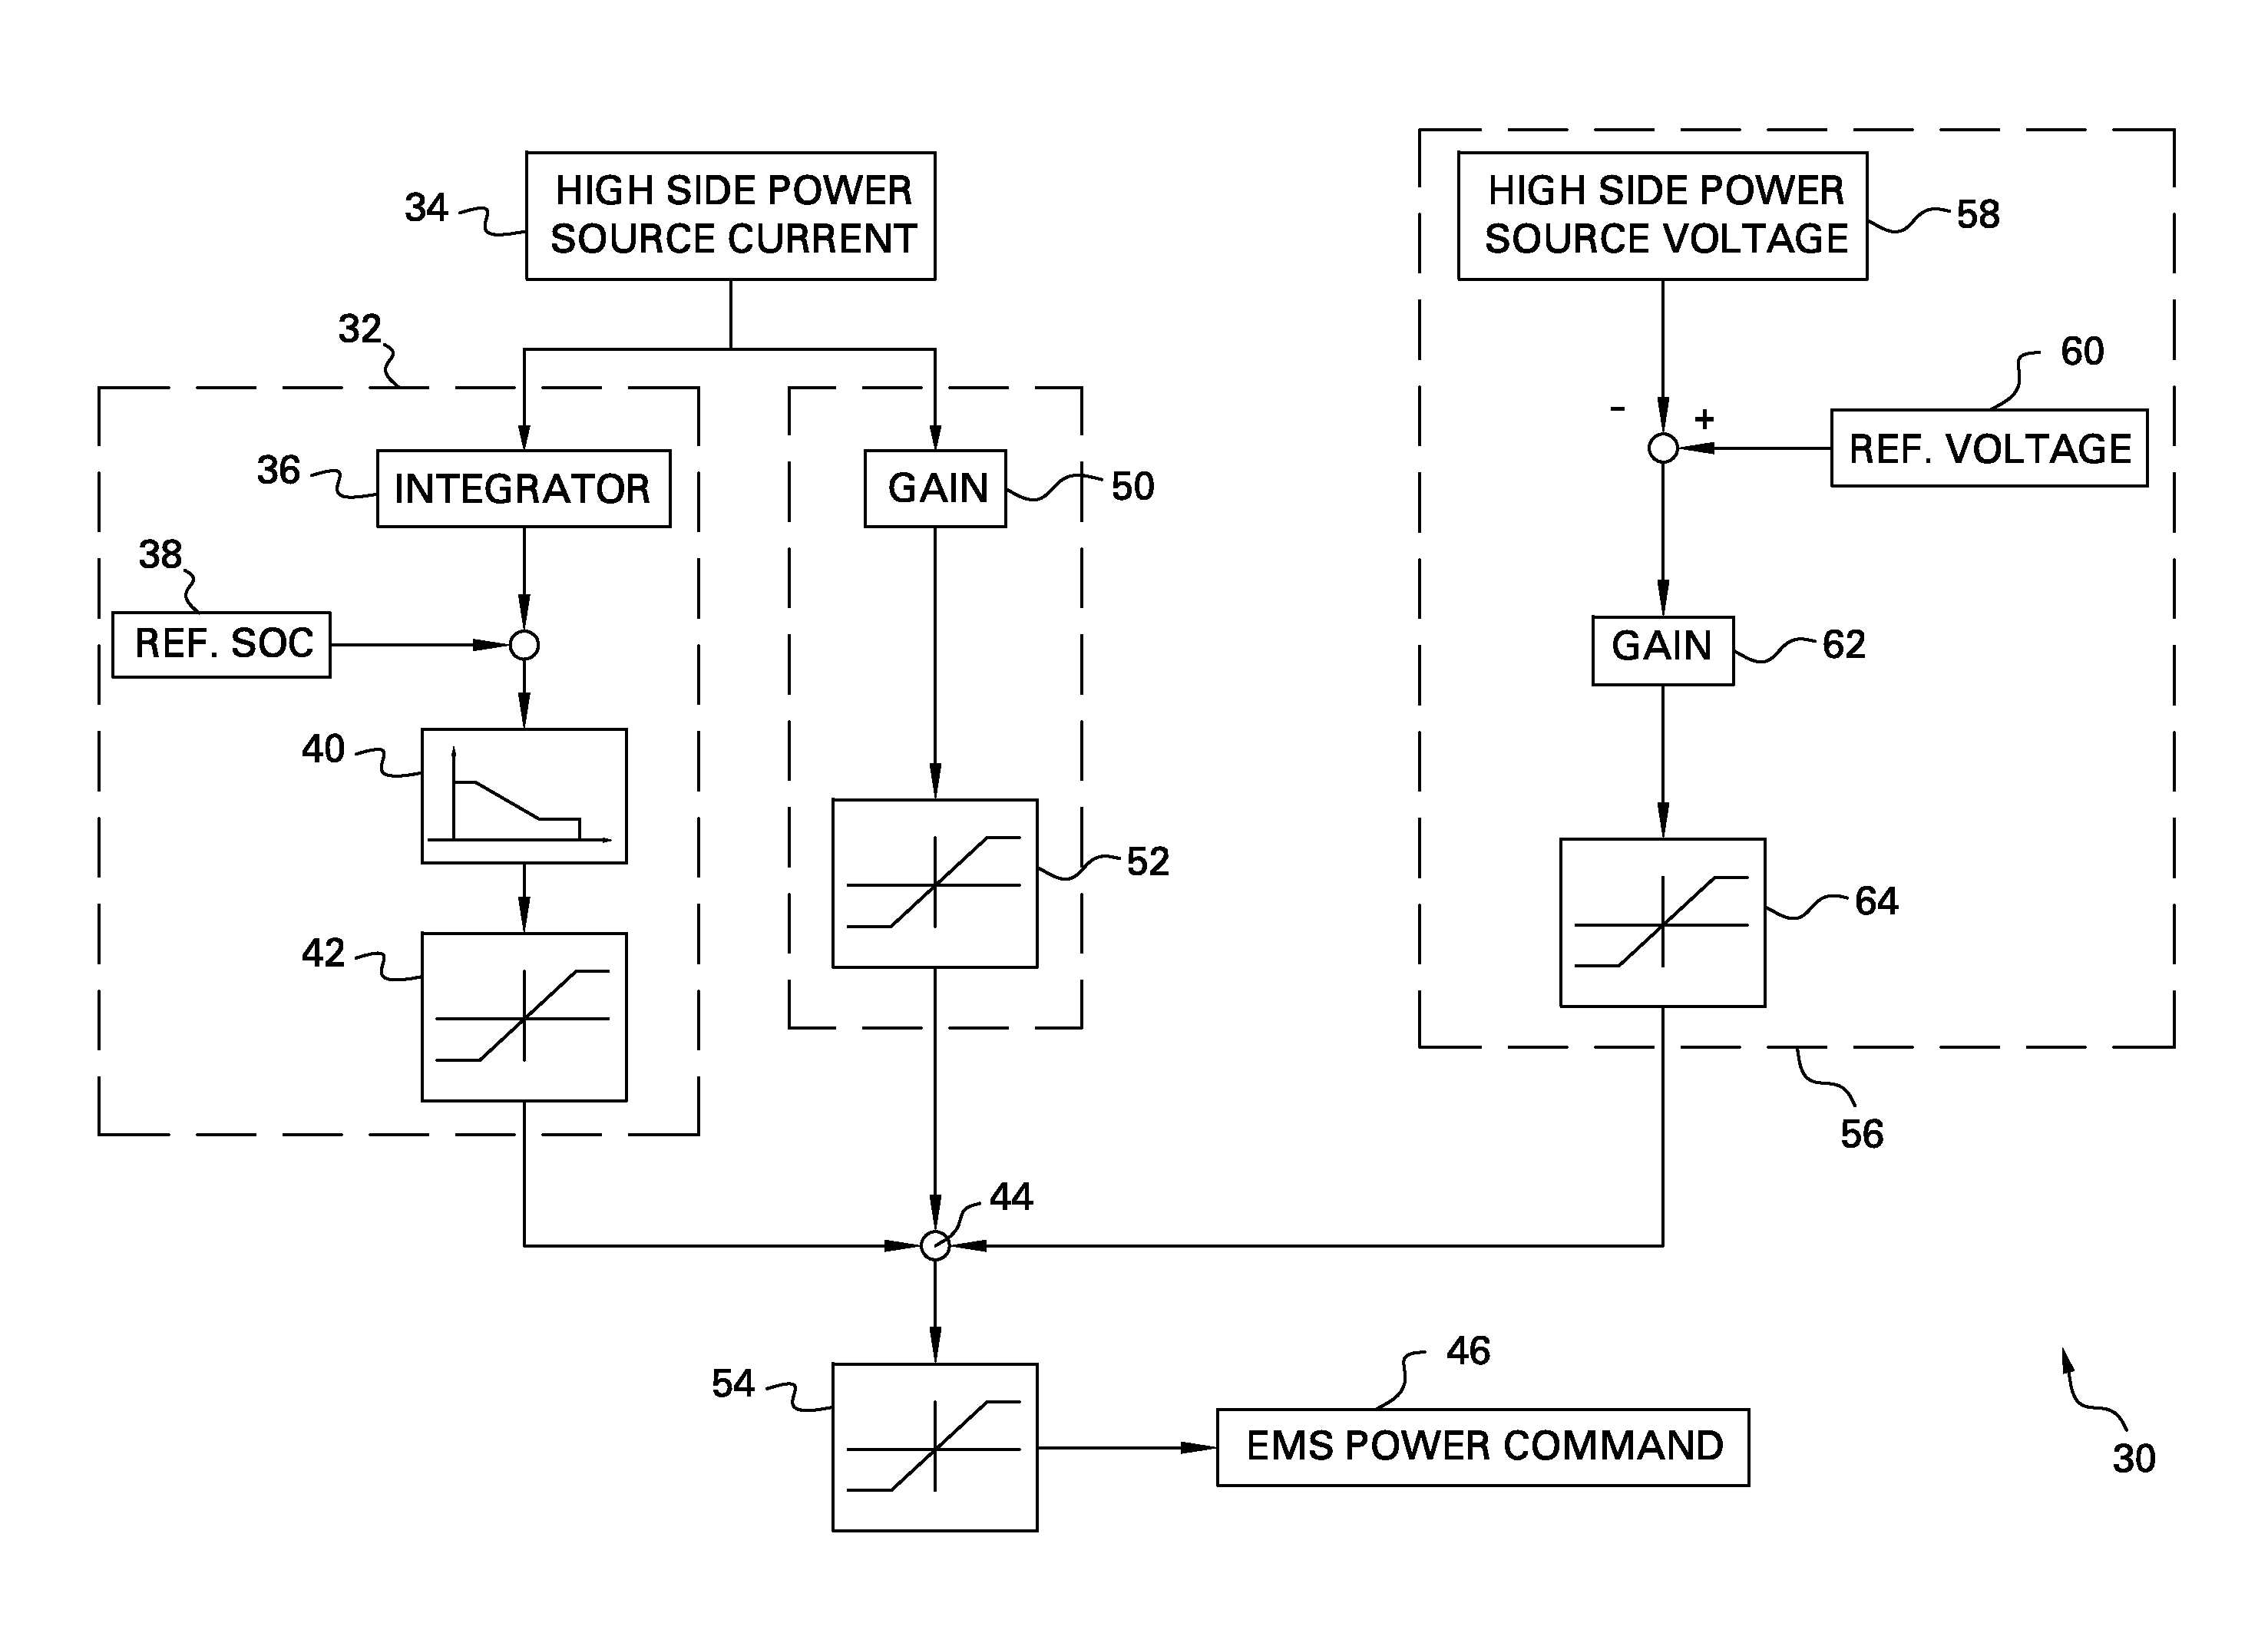 System and method for providing power control of an energy storage system